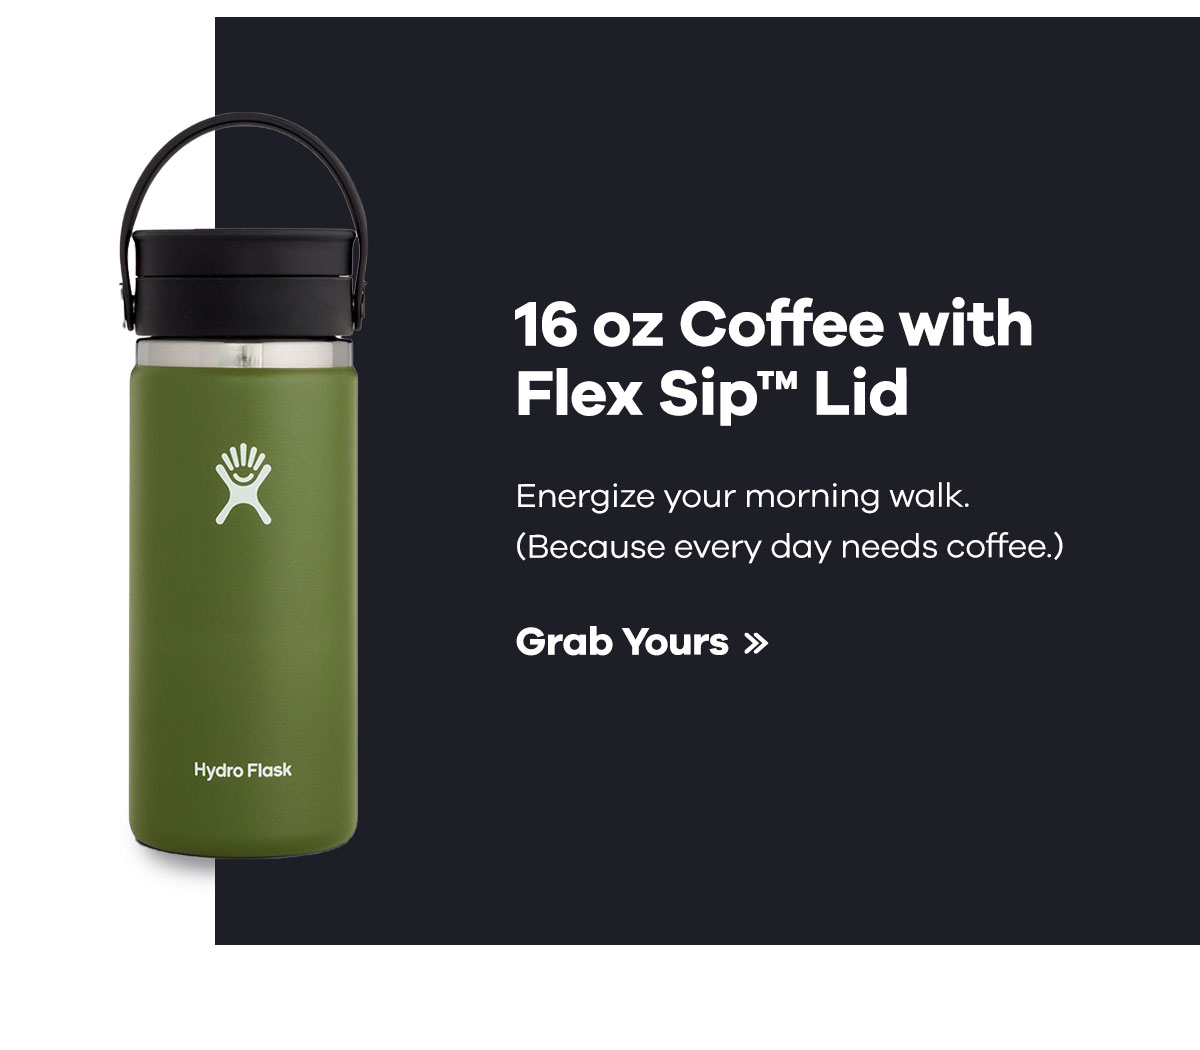 16 oz Coffee with Flex SipT Lid - Energize your morning wlk. (Because every day needs coffee.) | Grap Yours >>